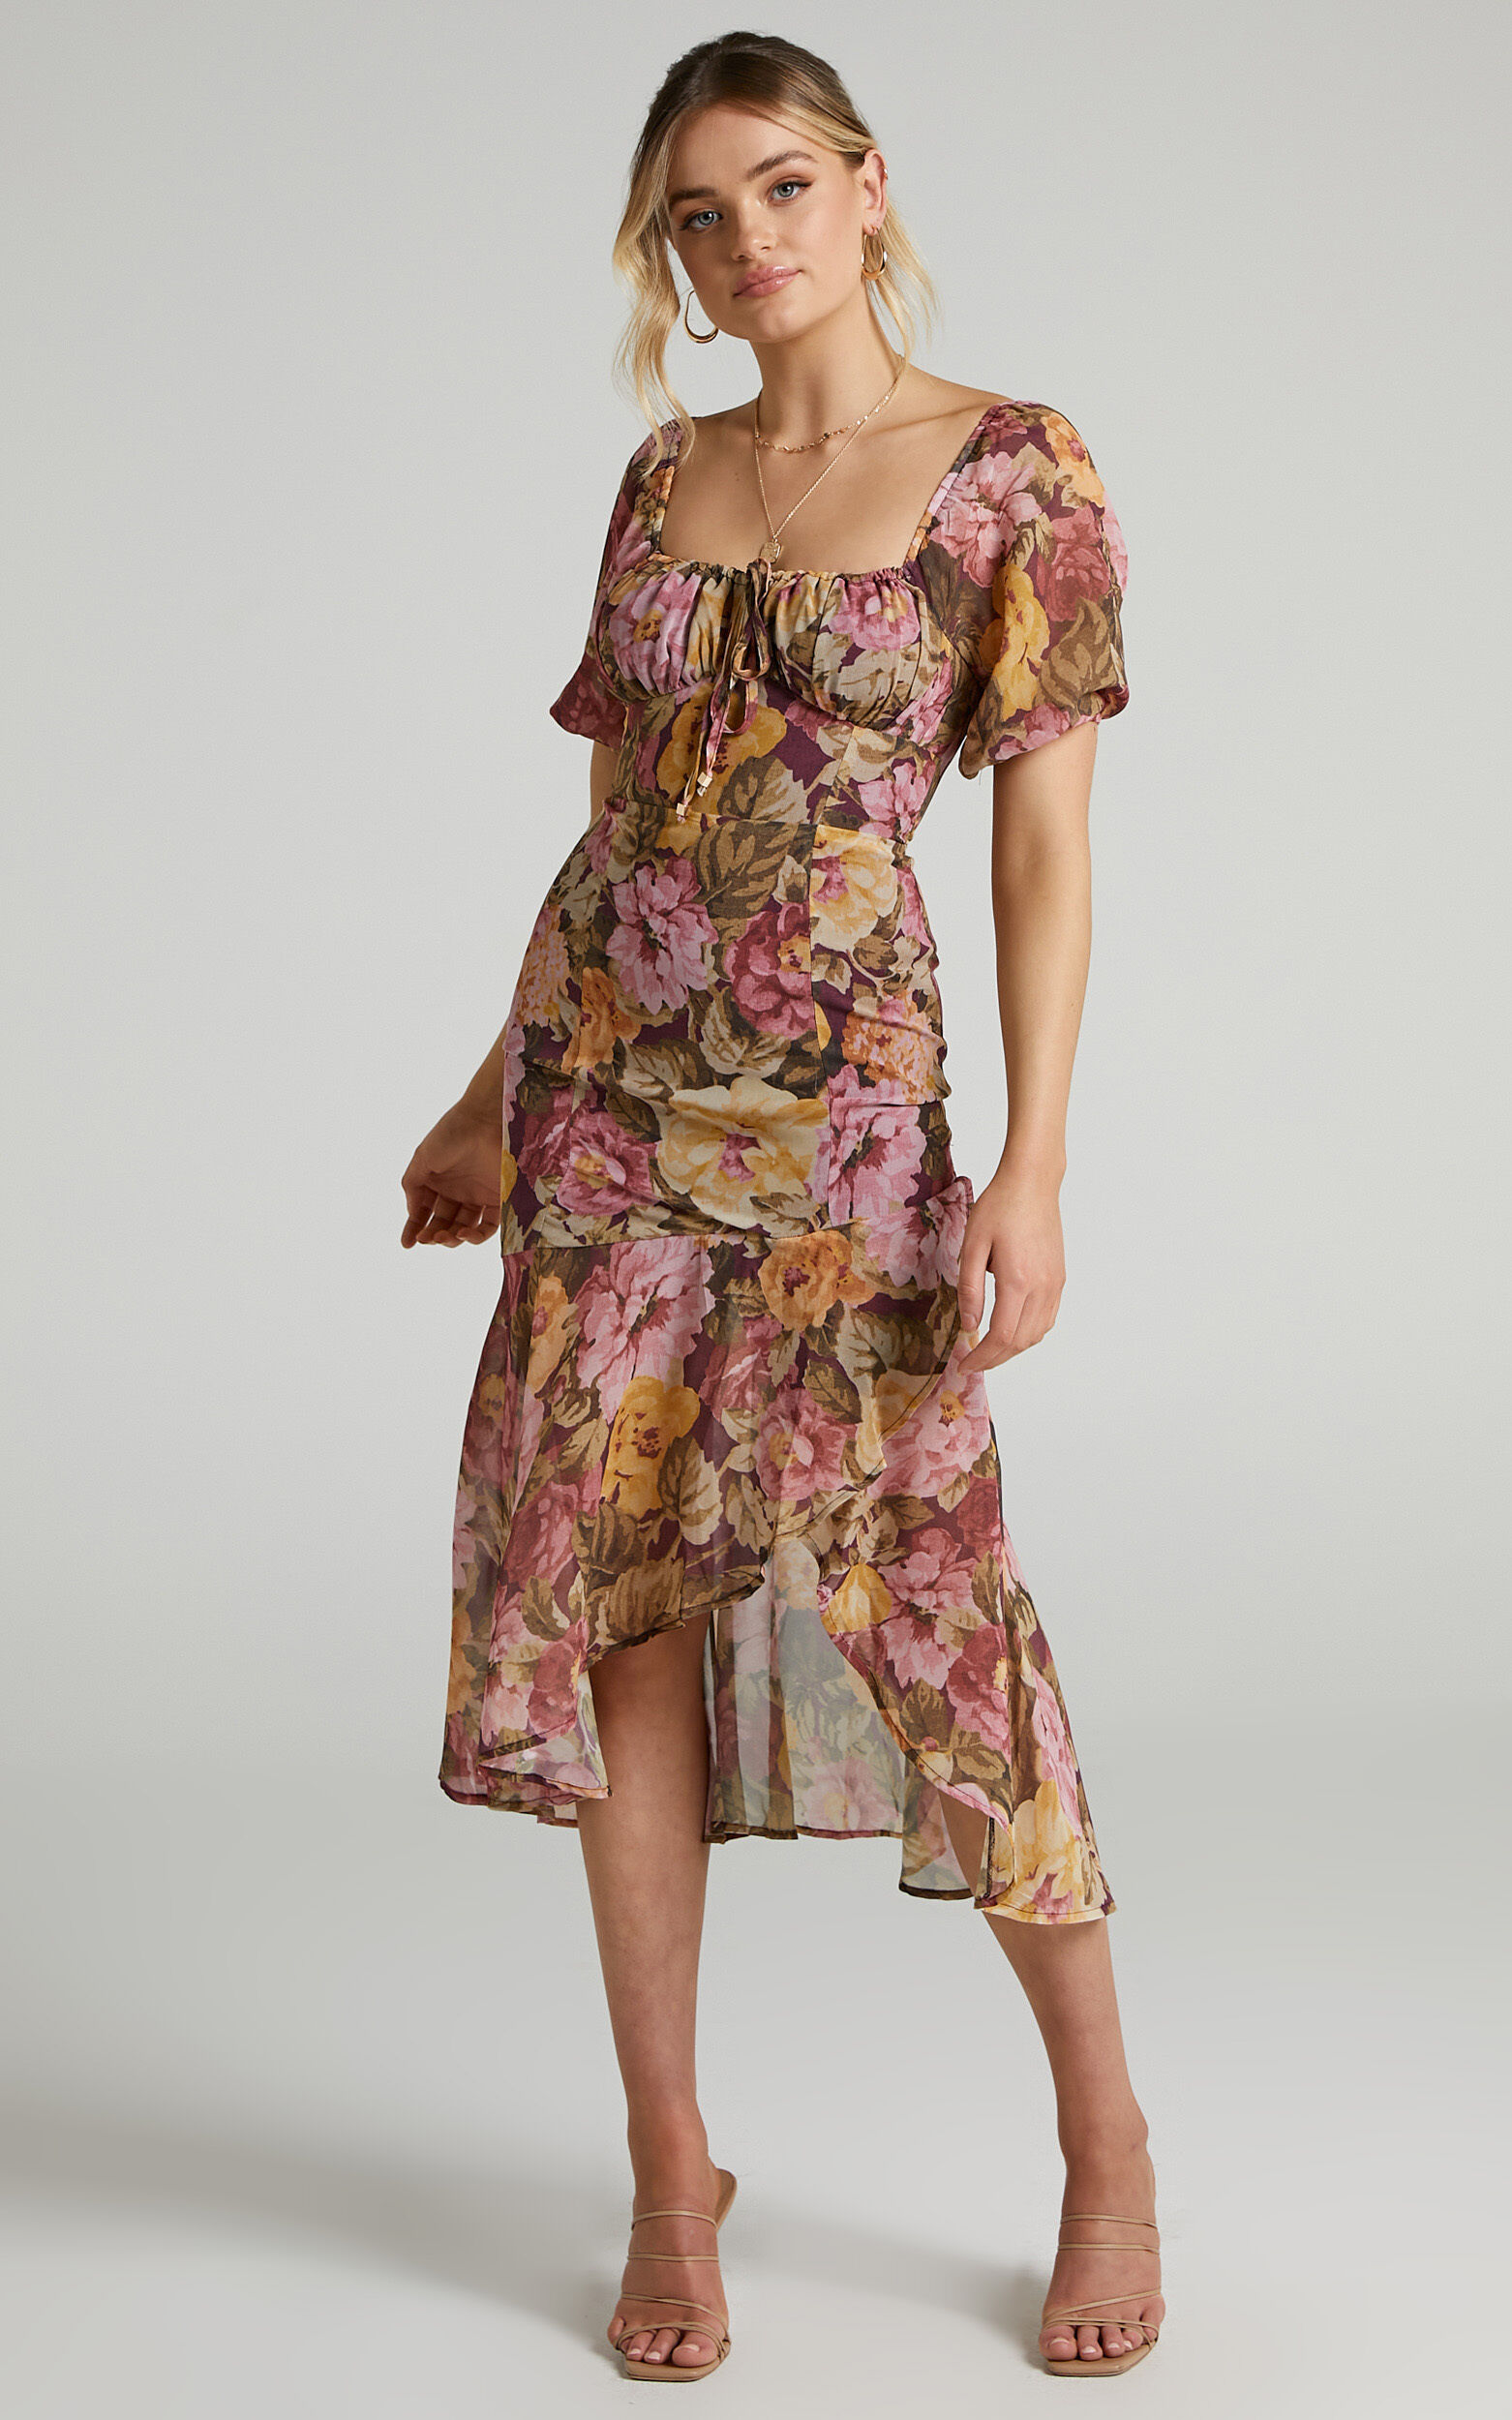 Jasalina Puff Sleeve Midi Dress in Classic Floral - 06, PNK3, super-hi-res image number null